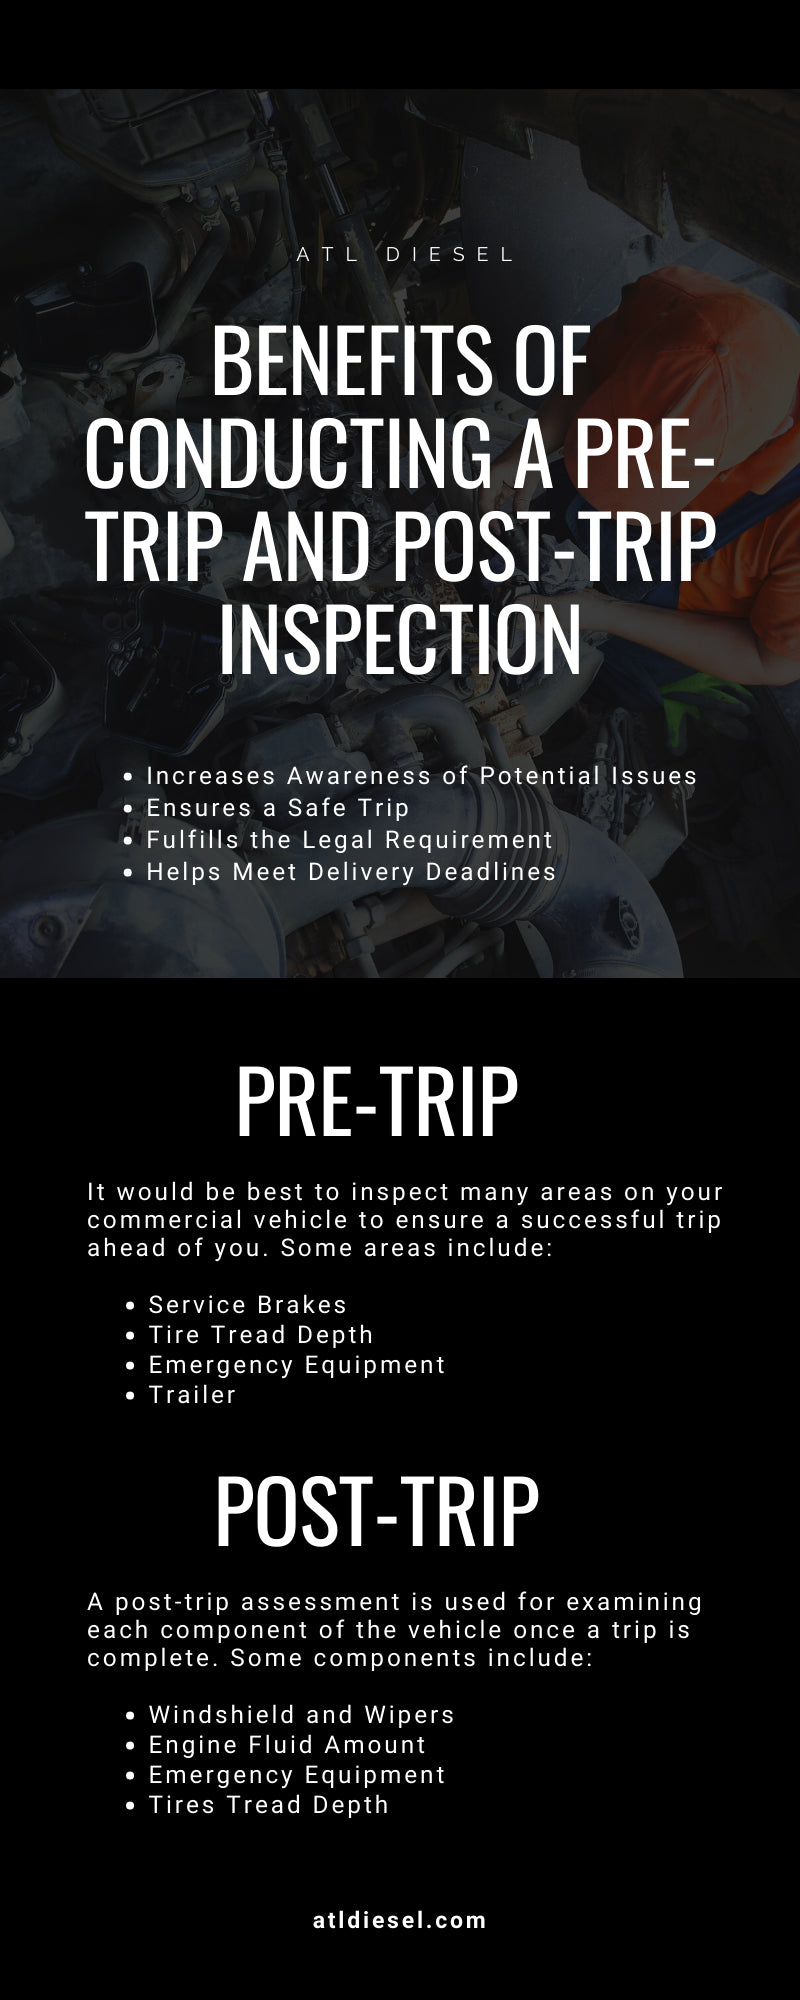 Benefits of Conducting a Pre-Trip and Post-Trip Inspection